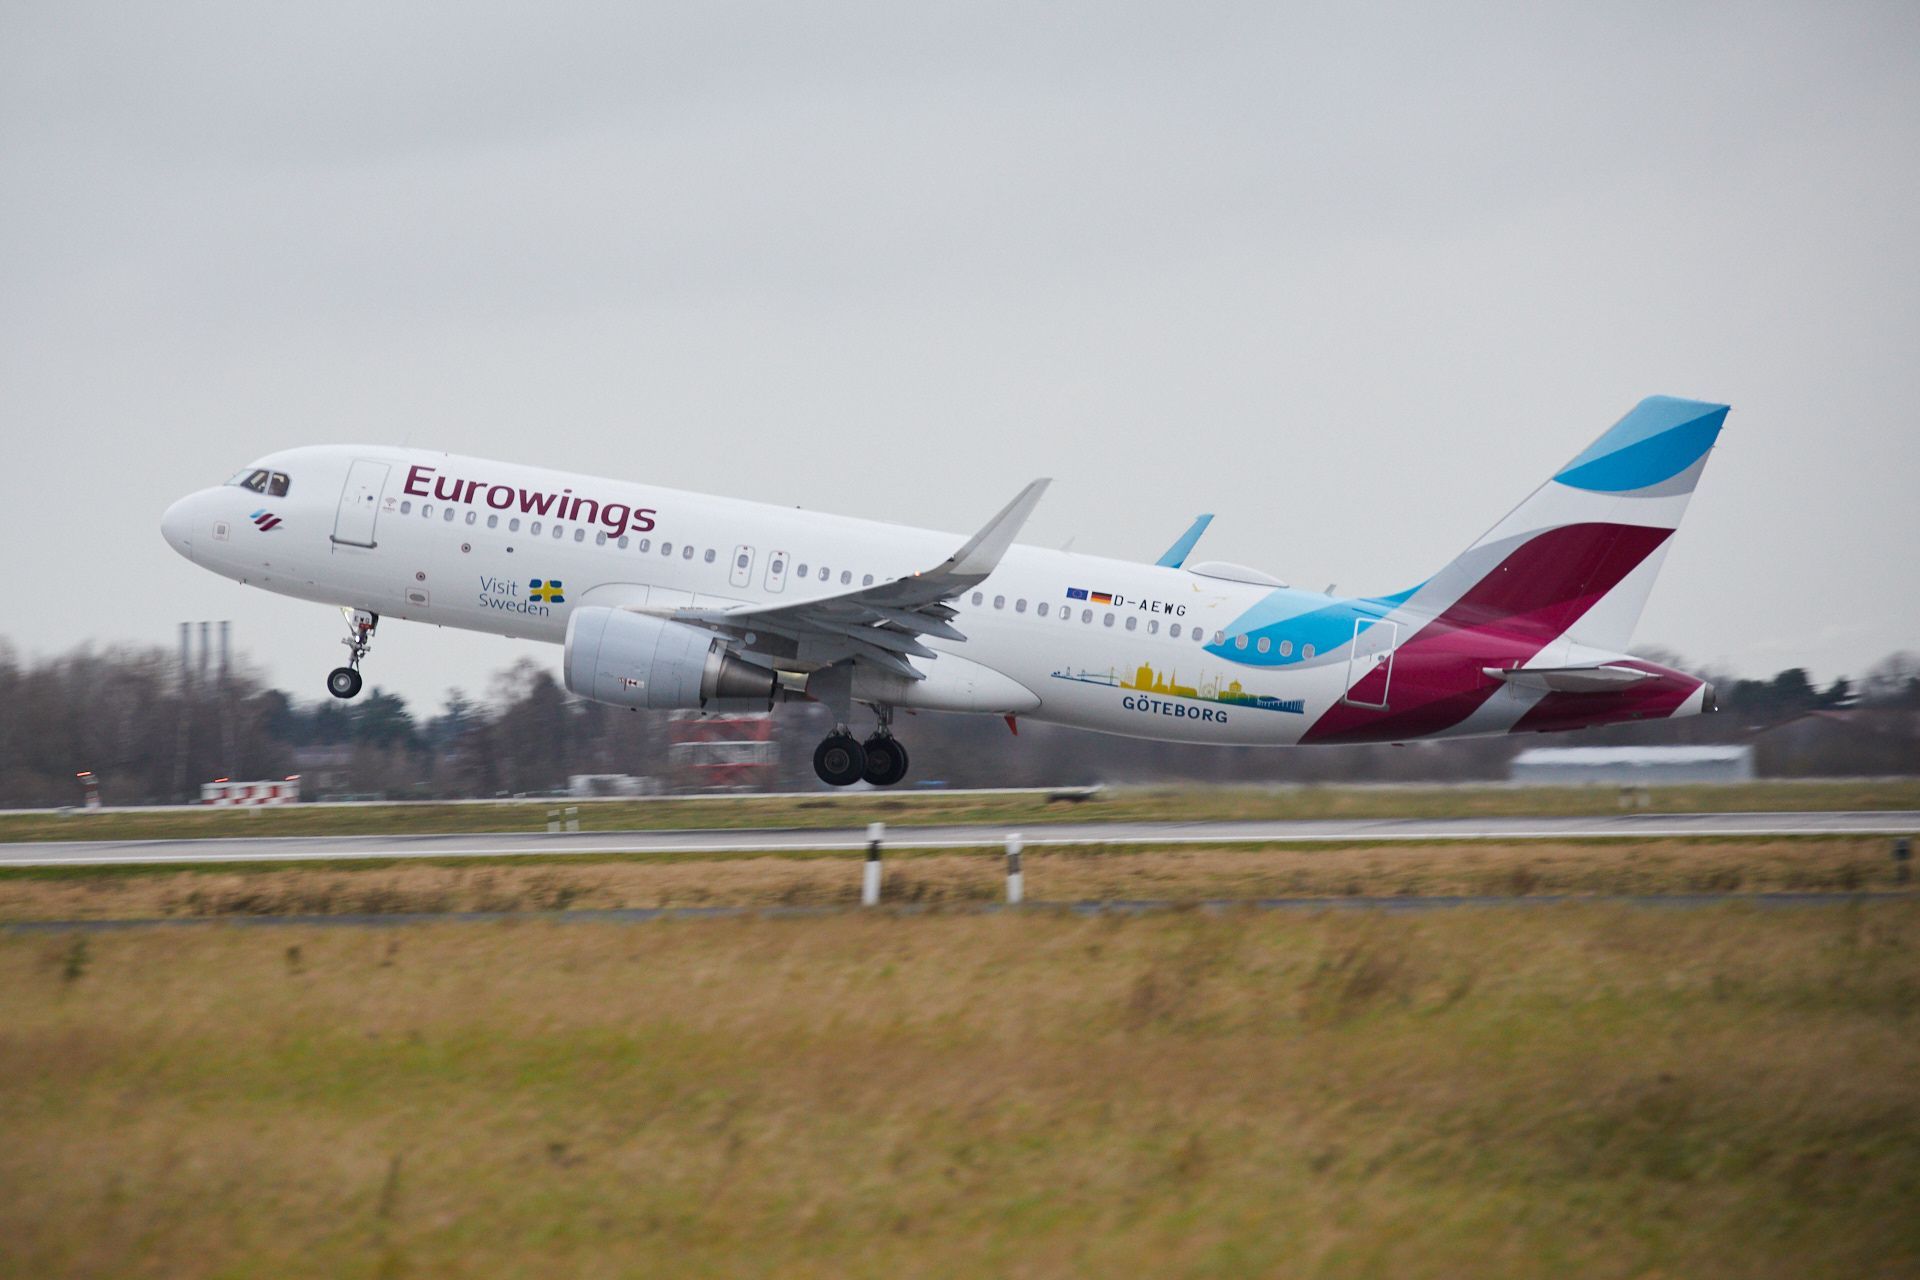 Eurowings_A320_departing_from_Airport_DUS-1